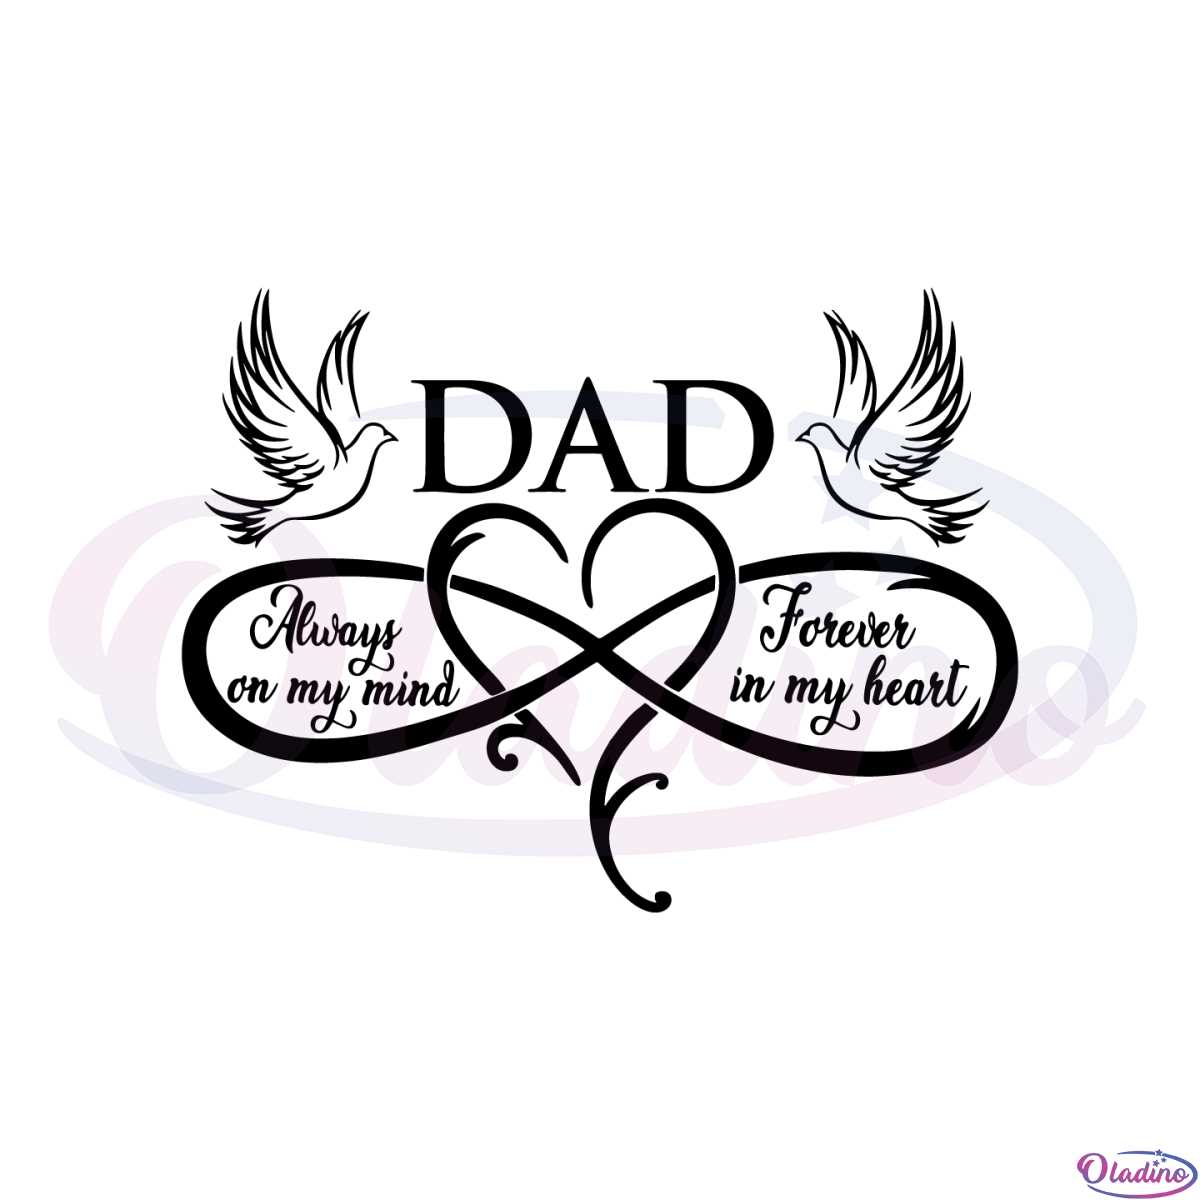 Father And His Kid Hand Drawn Sketch Isolated On White Background Happy  Moment Captured On Line Art Drawing Vector Illustration Stock Illustration  - Download Image Now - iStock